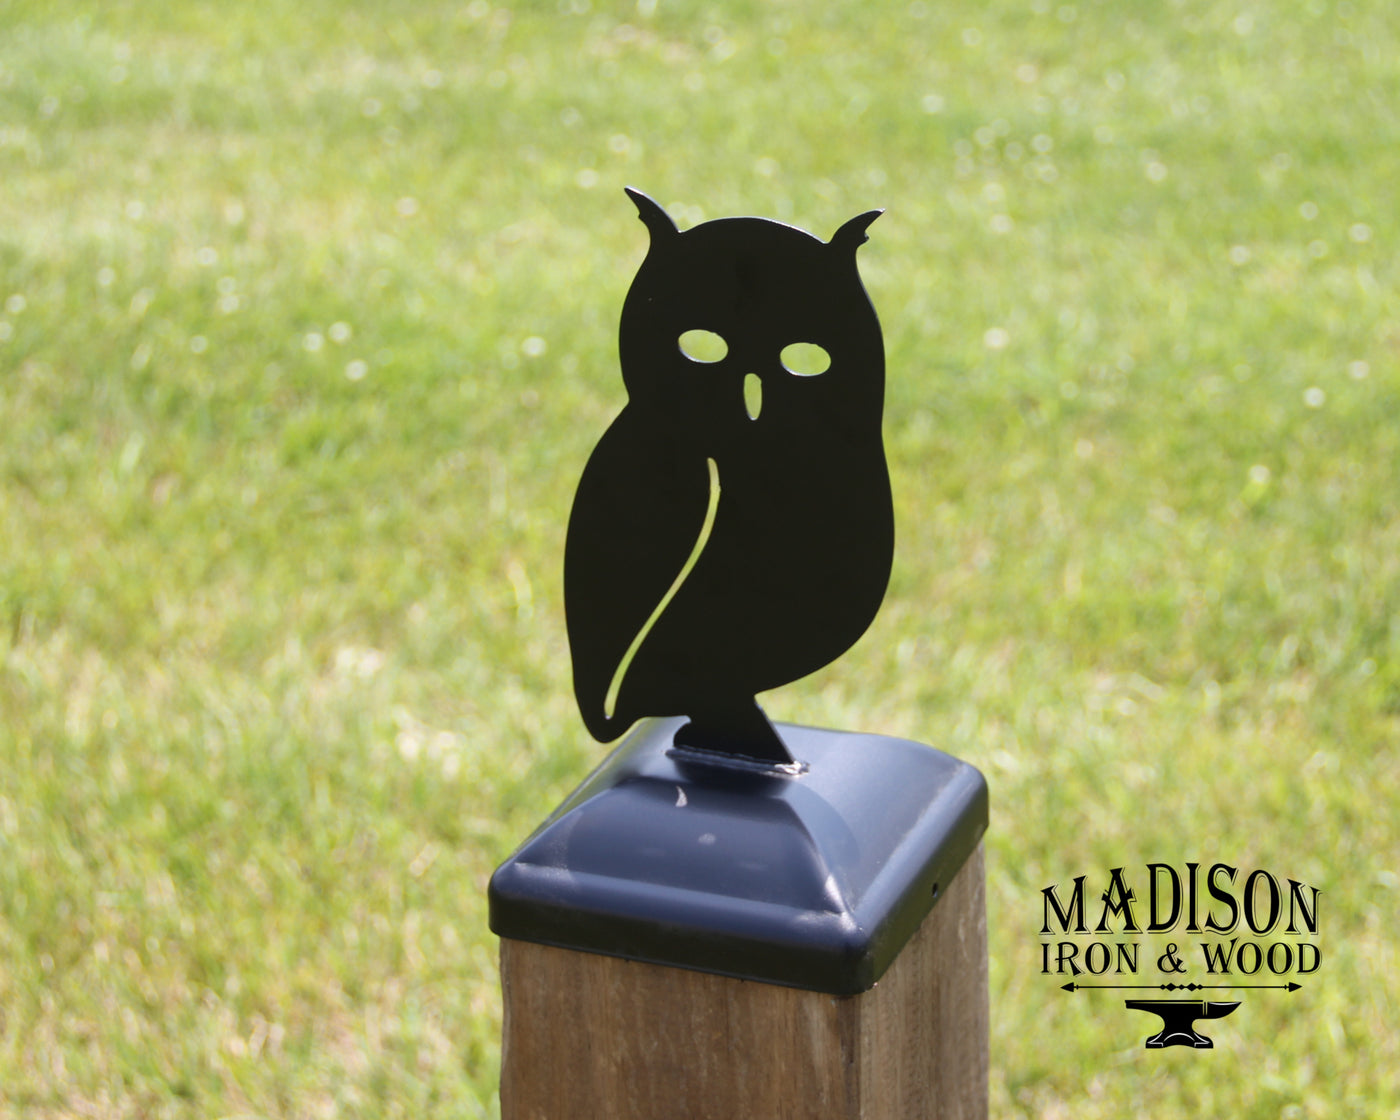 6x6 Owl Post Cap - Madison Iron and Wood - Post Cap - metal outdoor decor - Steel deocrations - american made products - veteran owned business products - fencing decorations - fencing supplies - custom wall decorations - personalized wall signs - steel - decorative post caps - steel post caps - metal post caps - brackets - structural brackets - home improvement - easter - easter decorations - easter gift - easter yard decor